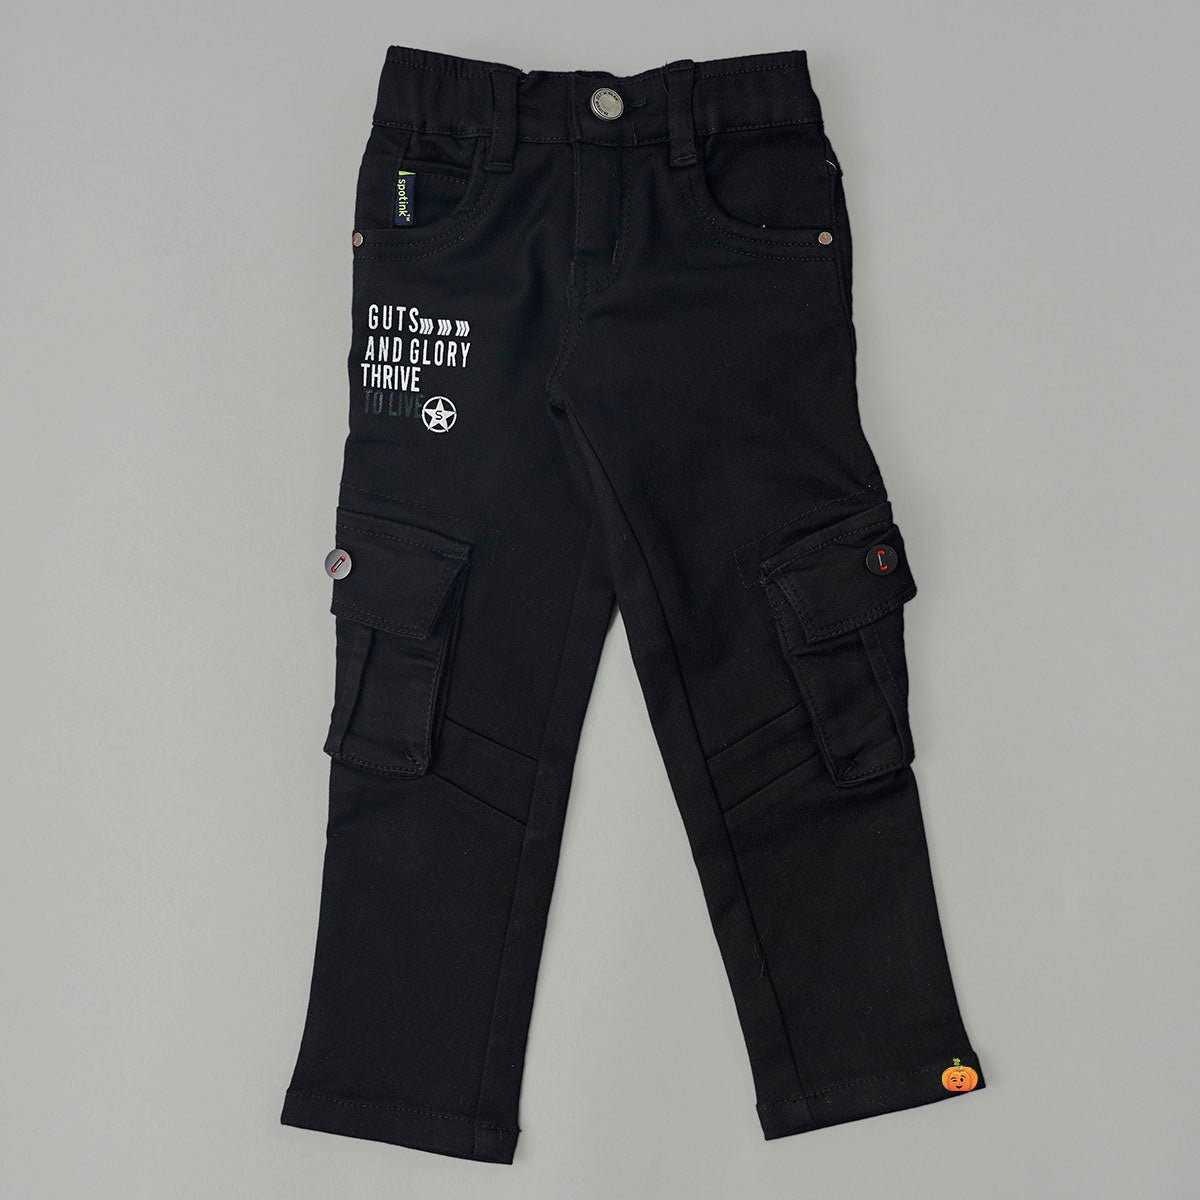 Buy kids jeans Pants Online at Best Prices in India – OPUS RKID